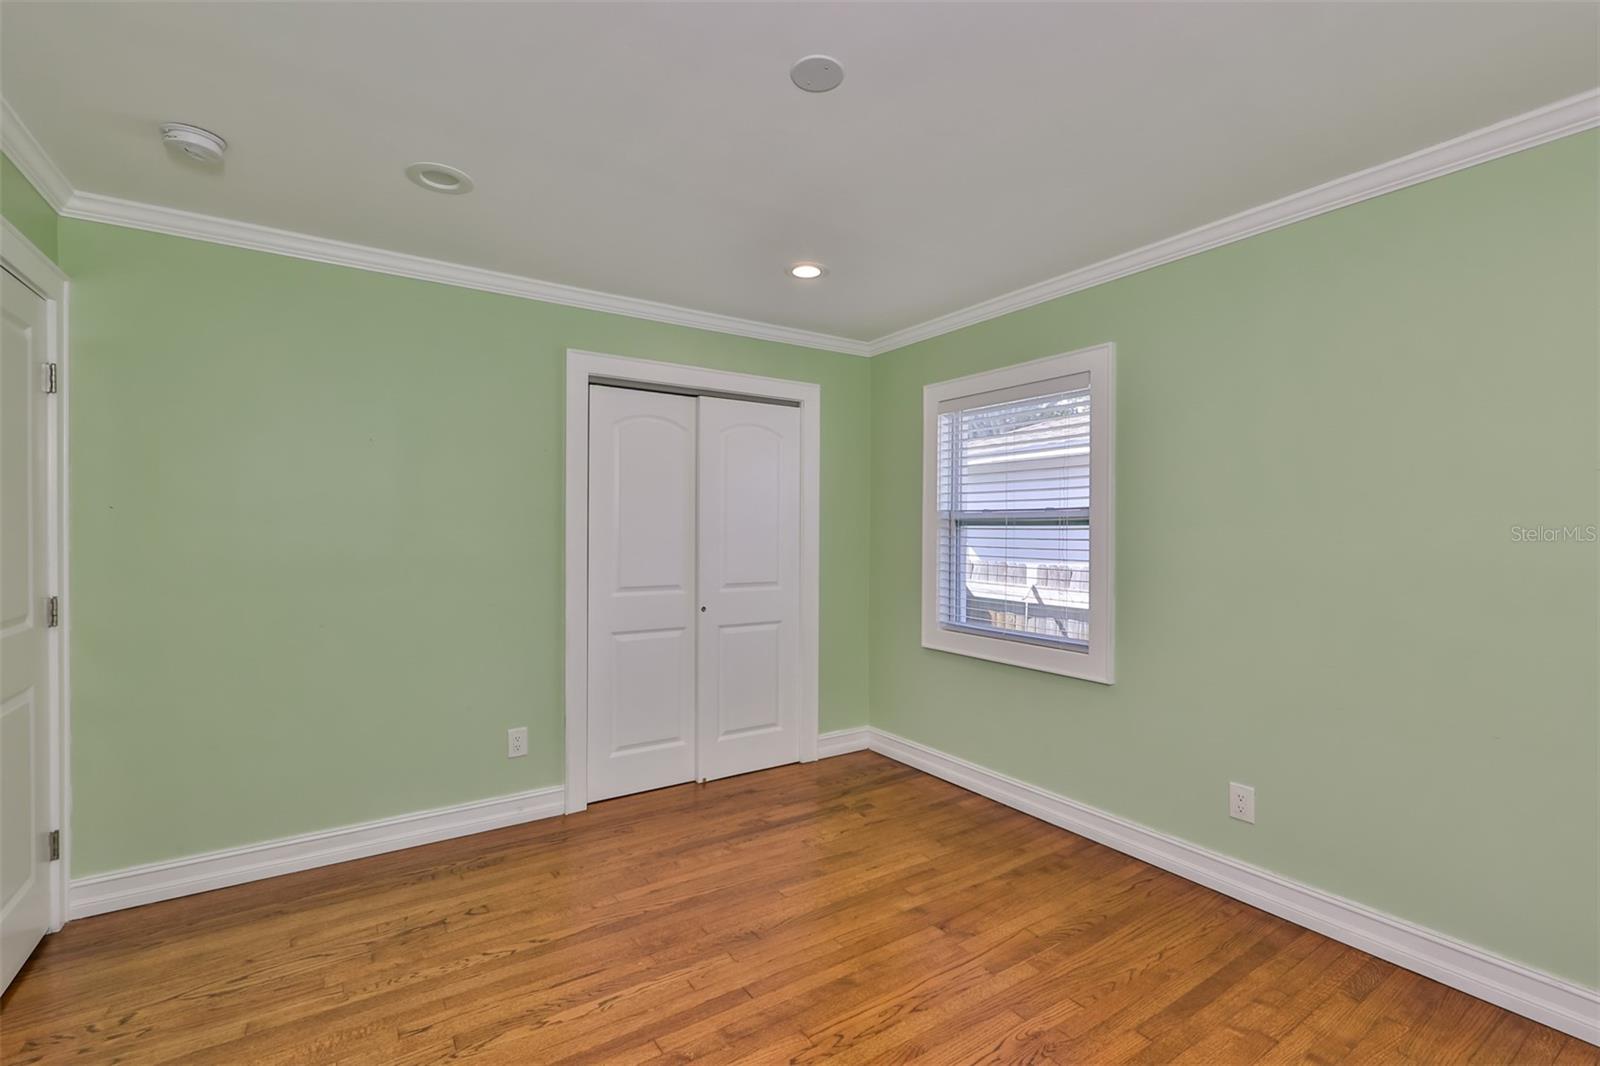 Br #3 With Hardwood Floors, brightly colored with lots of light.